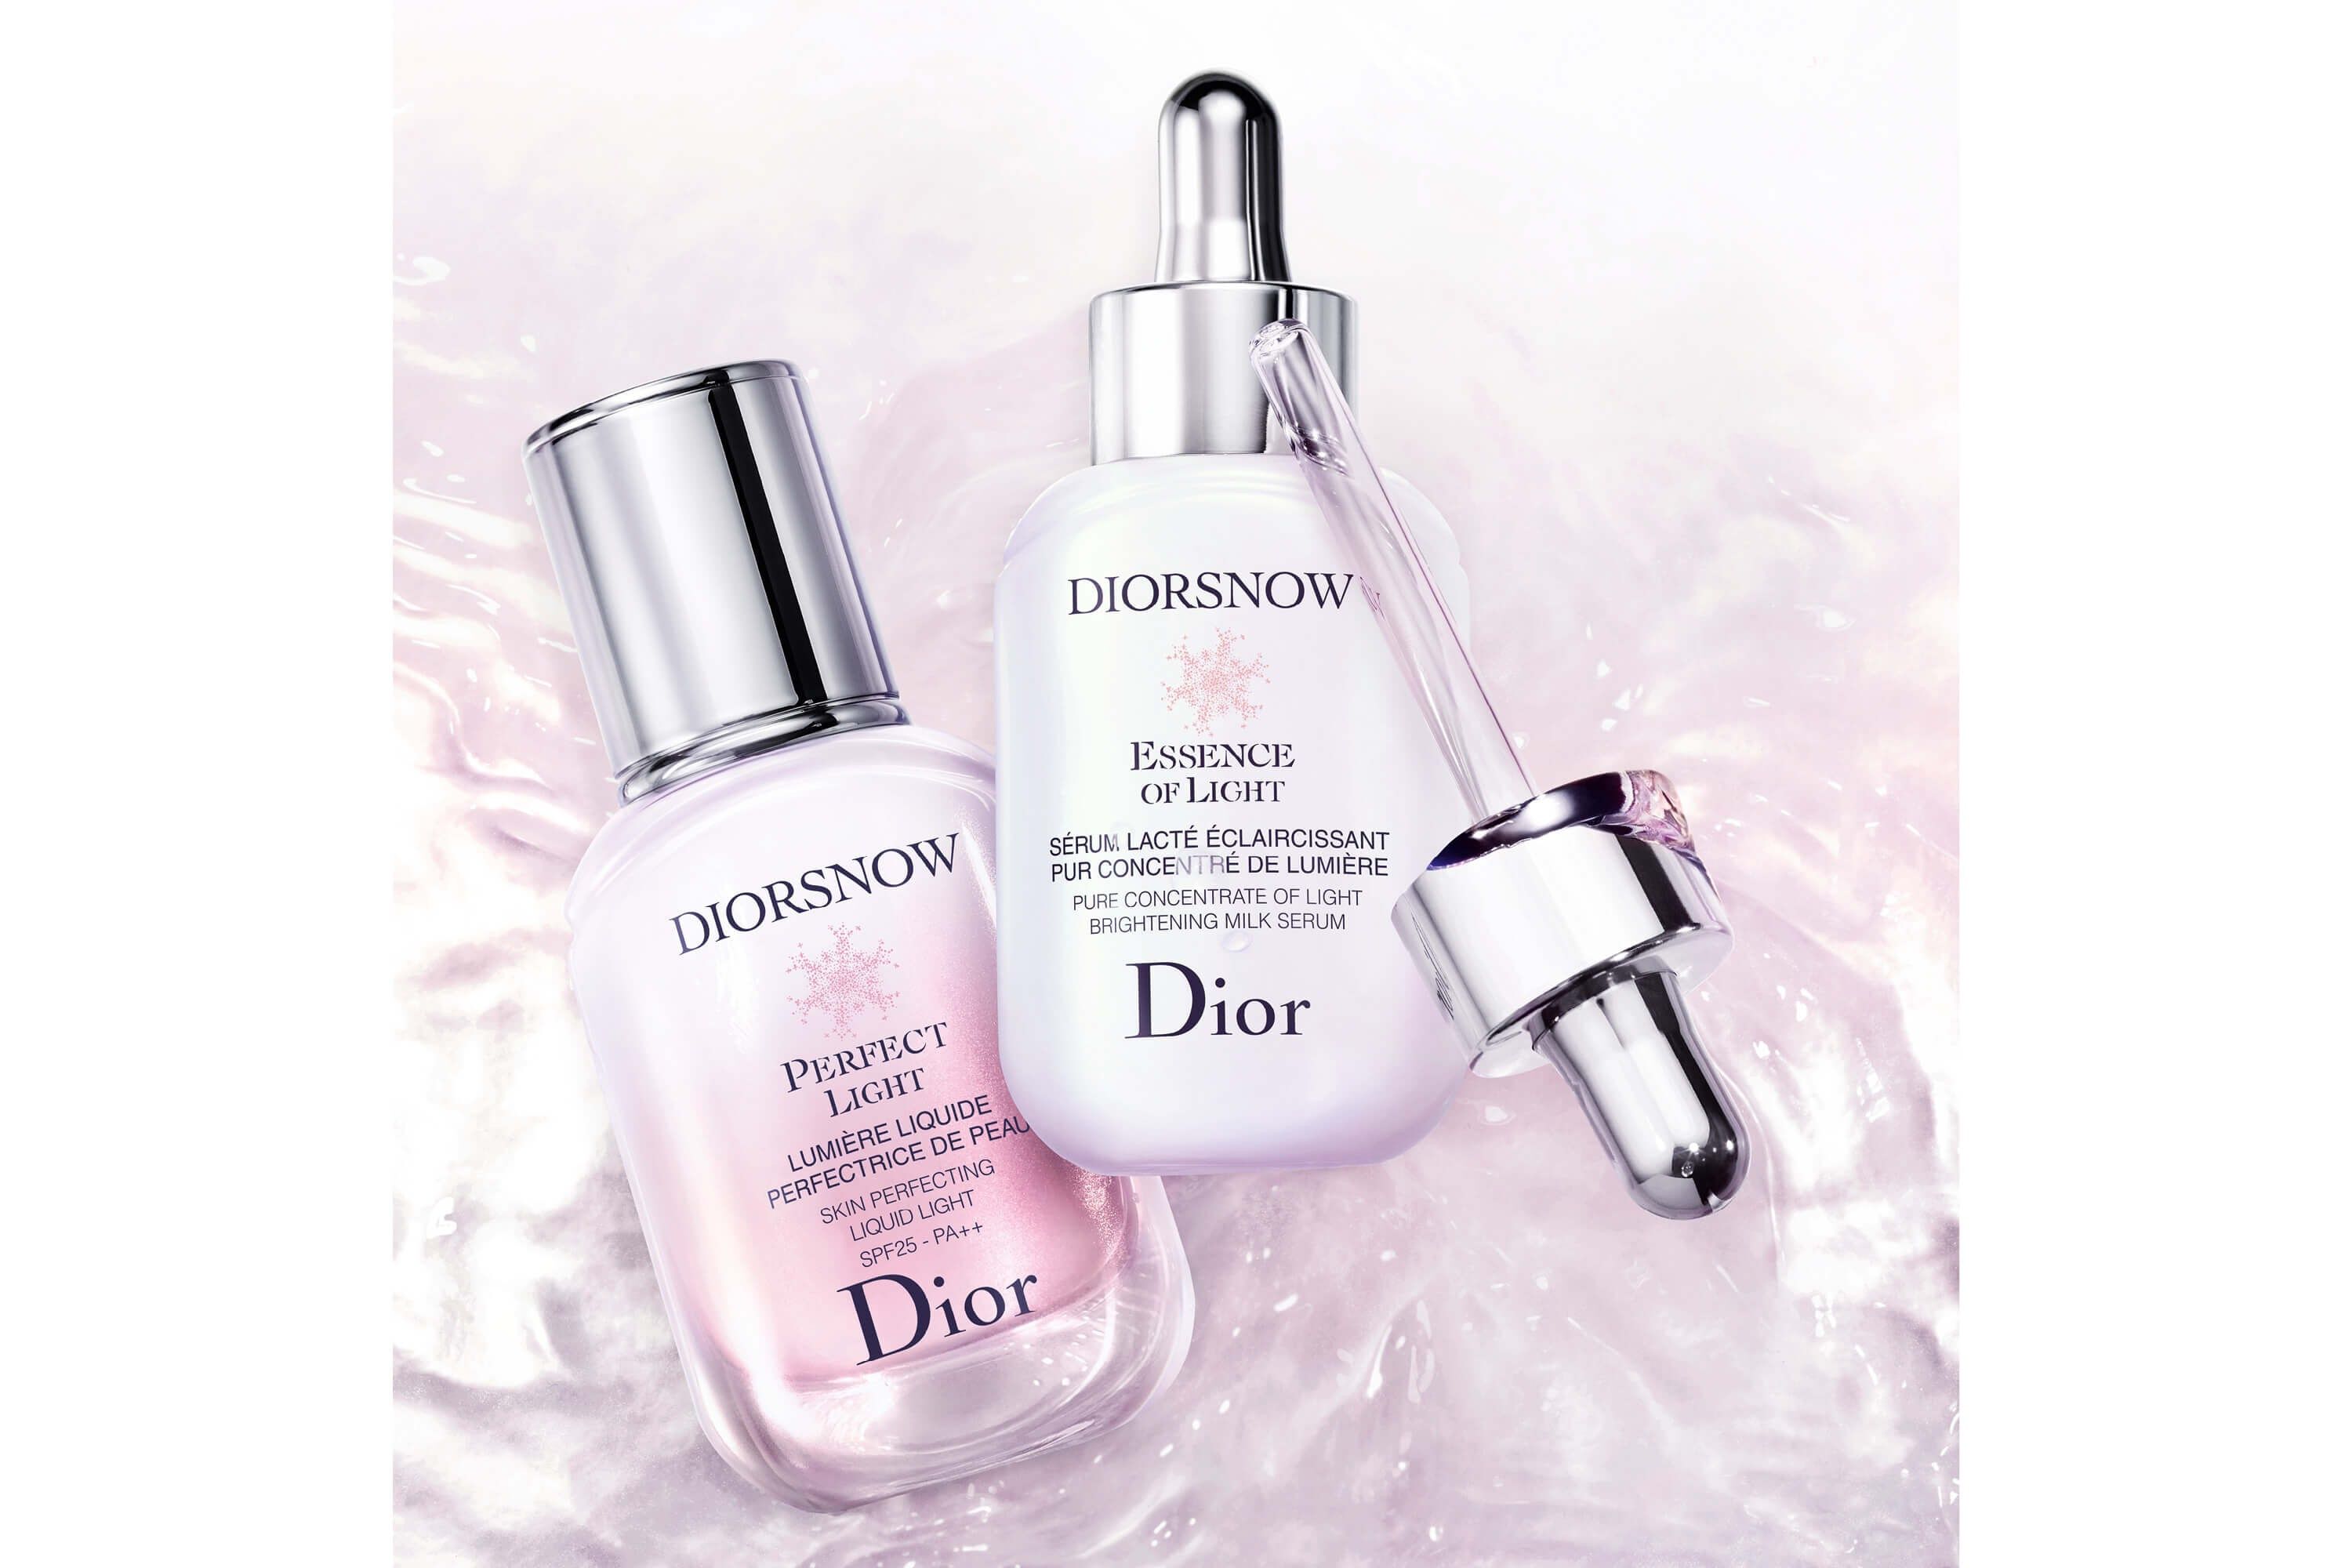 Diorsnow Perfect Light Cushion Prismatic a natural and translucent  complexion  DIOR